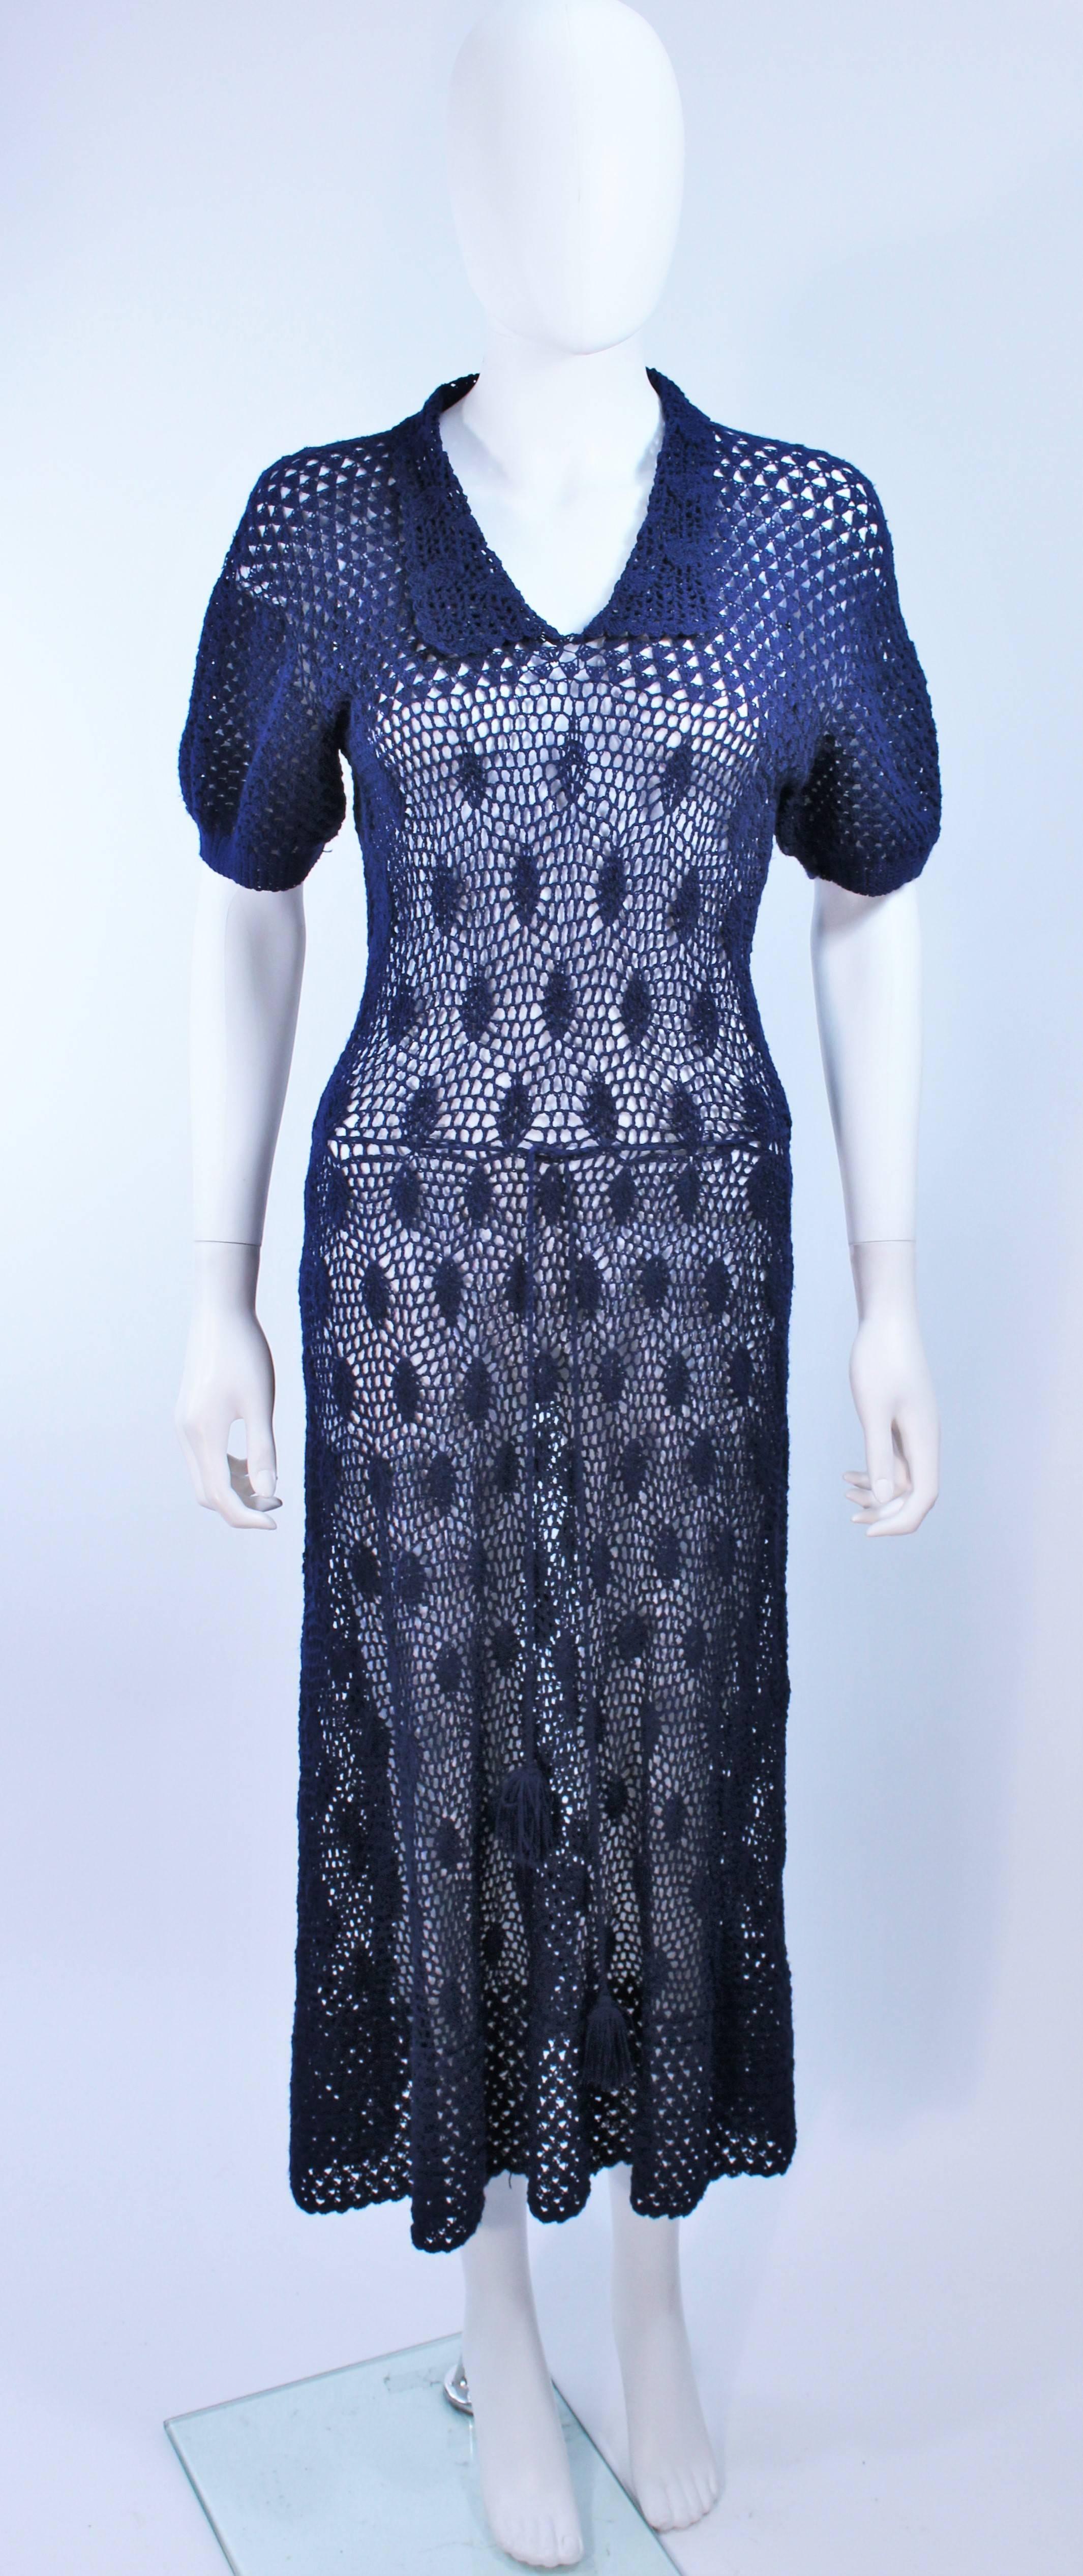 This dress is composed of a navy crochet knit. Features a waist tie detail. In excellent vintage condition.

**Please cross-reference measurements for personal accuracy. Size in description box is an estimation.

Measures